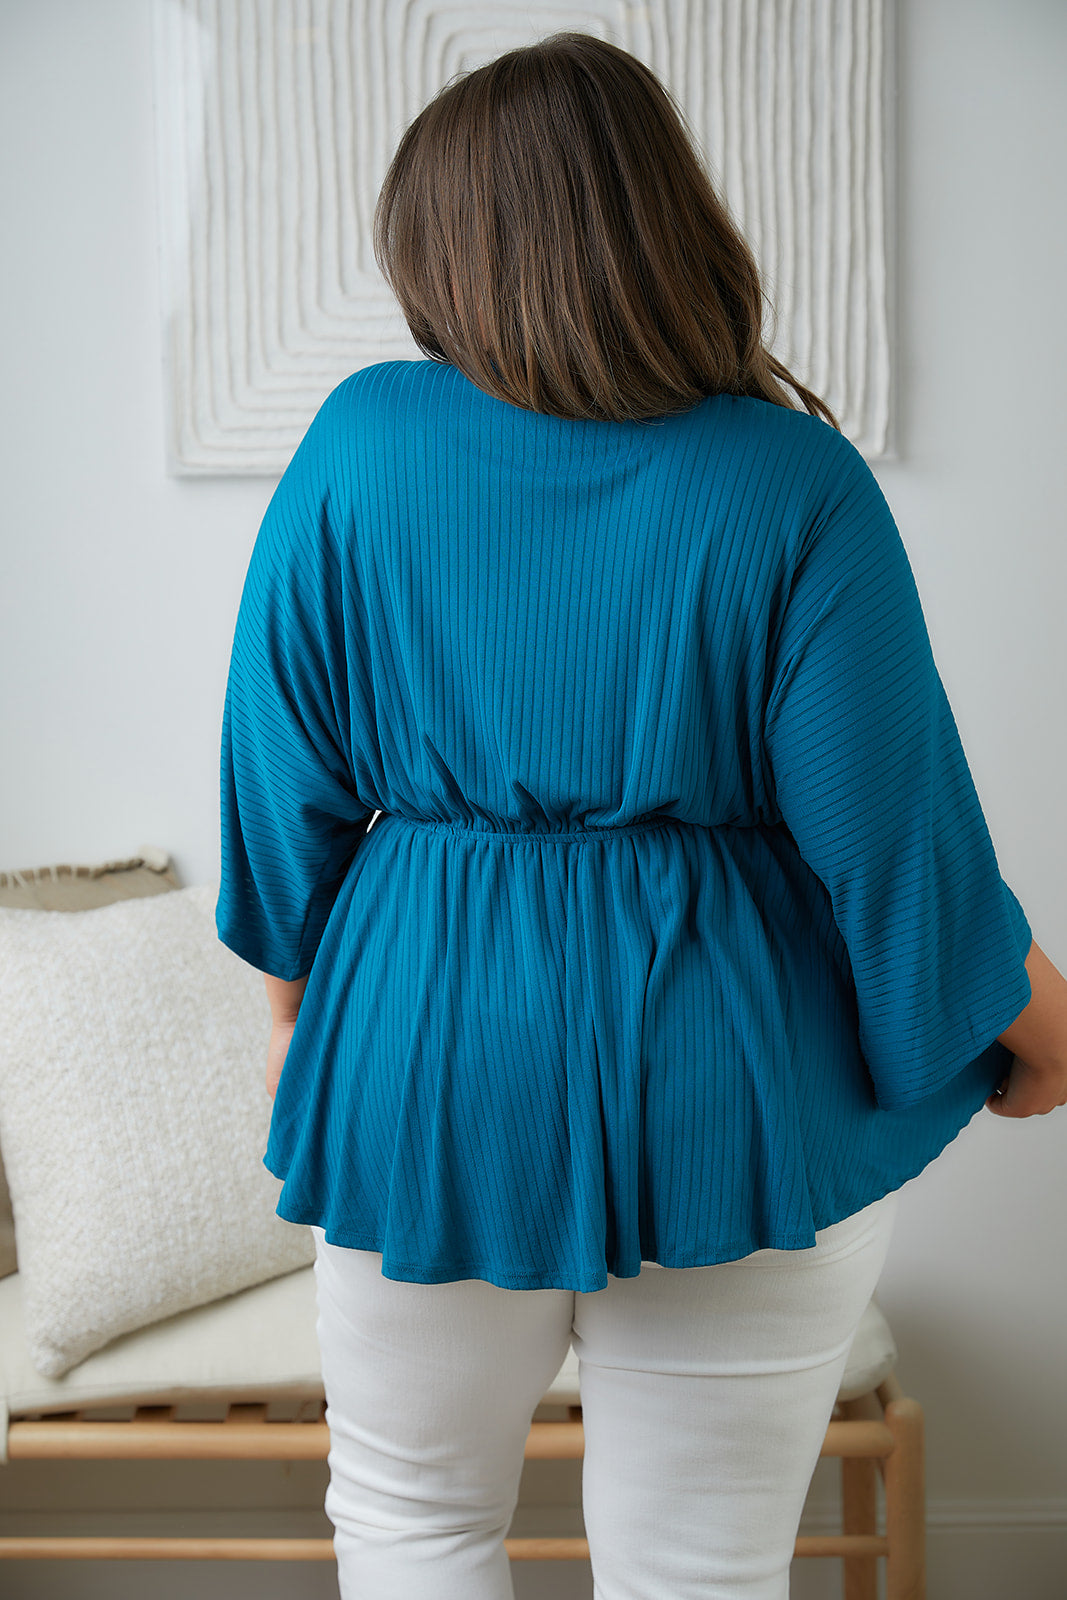 Day Date Teal Peplum Top, SMALL & MED left!